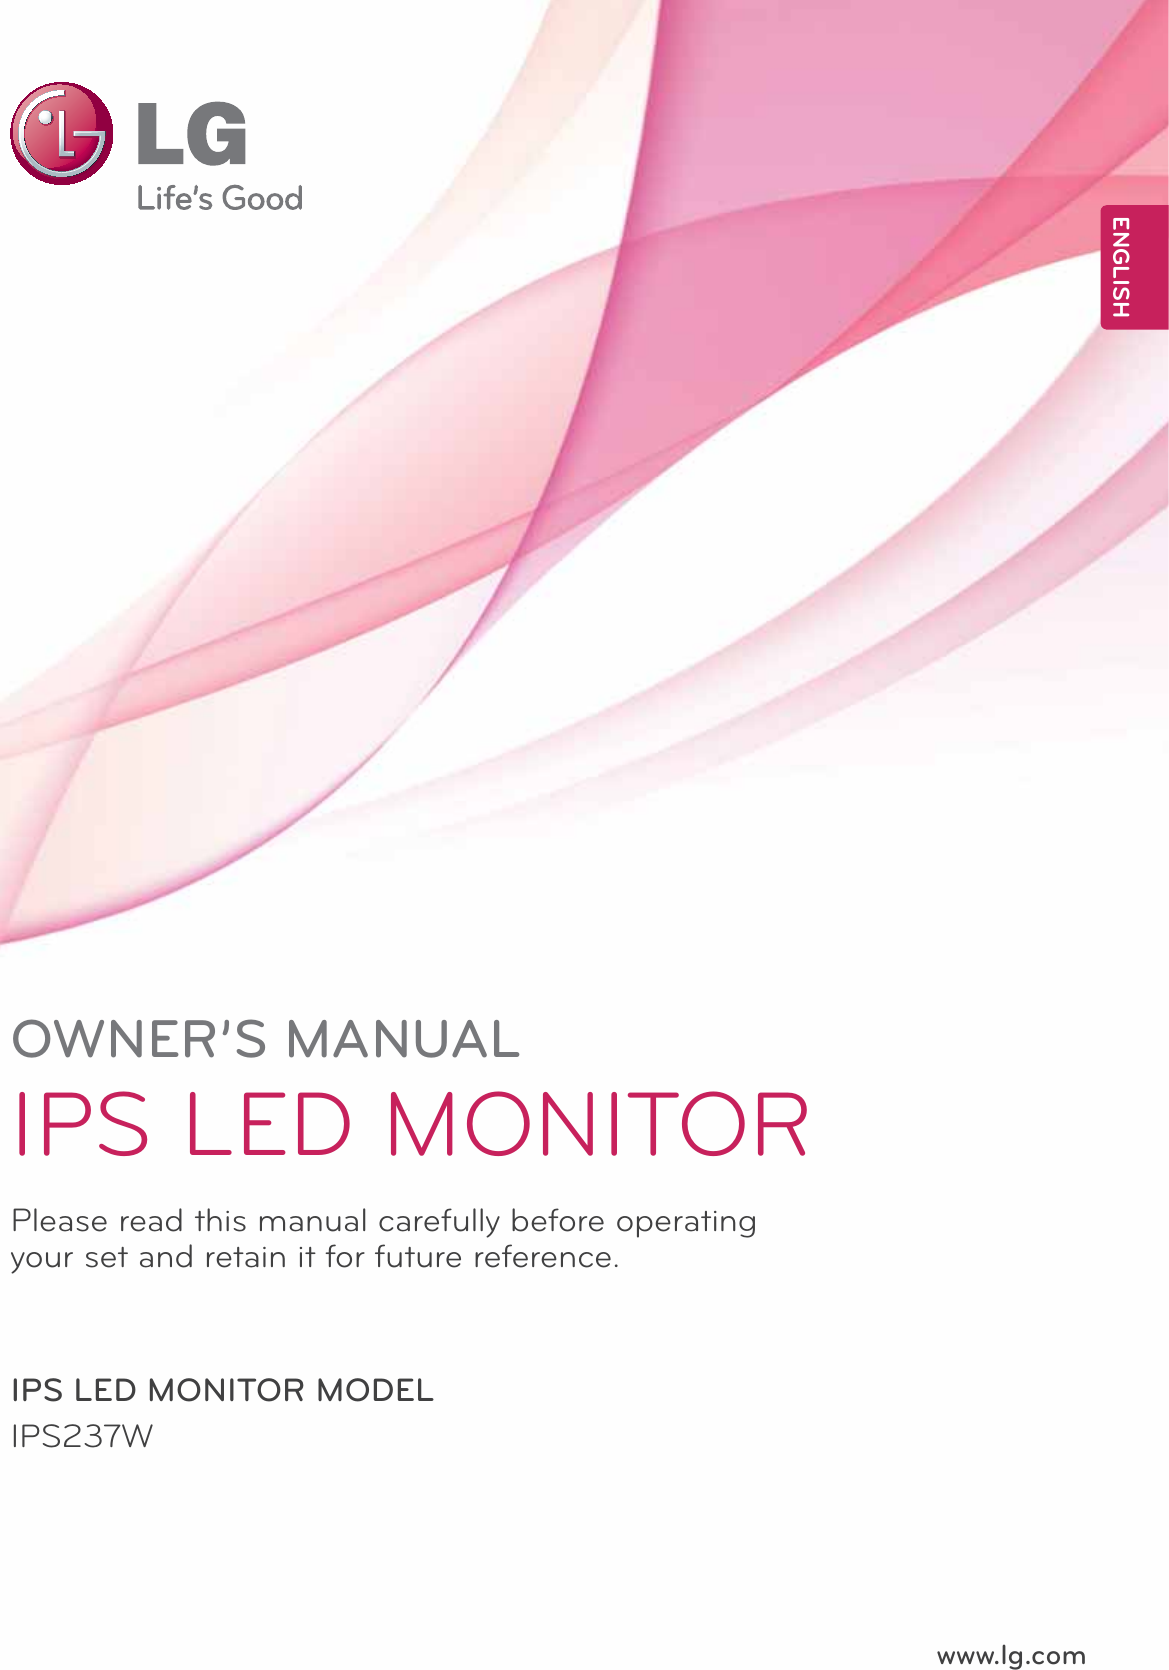 www.lg.comOWNER’S MANUALIPS LED MONITORIPS237WPlease read this manual carefully before operating your set and retain it for future reference.IPS LED MONITOR MODELENGLISH